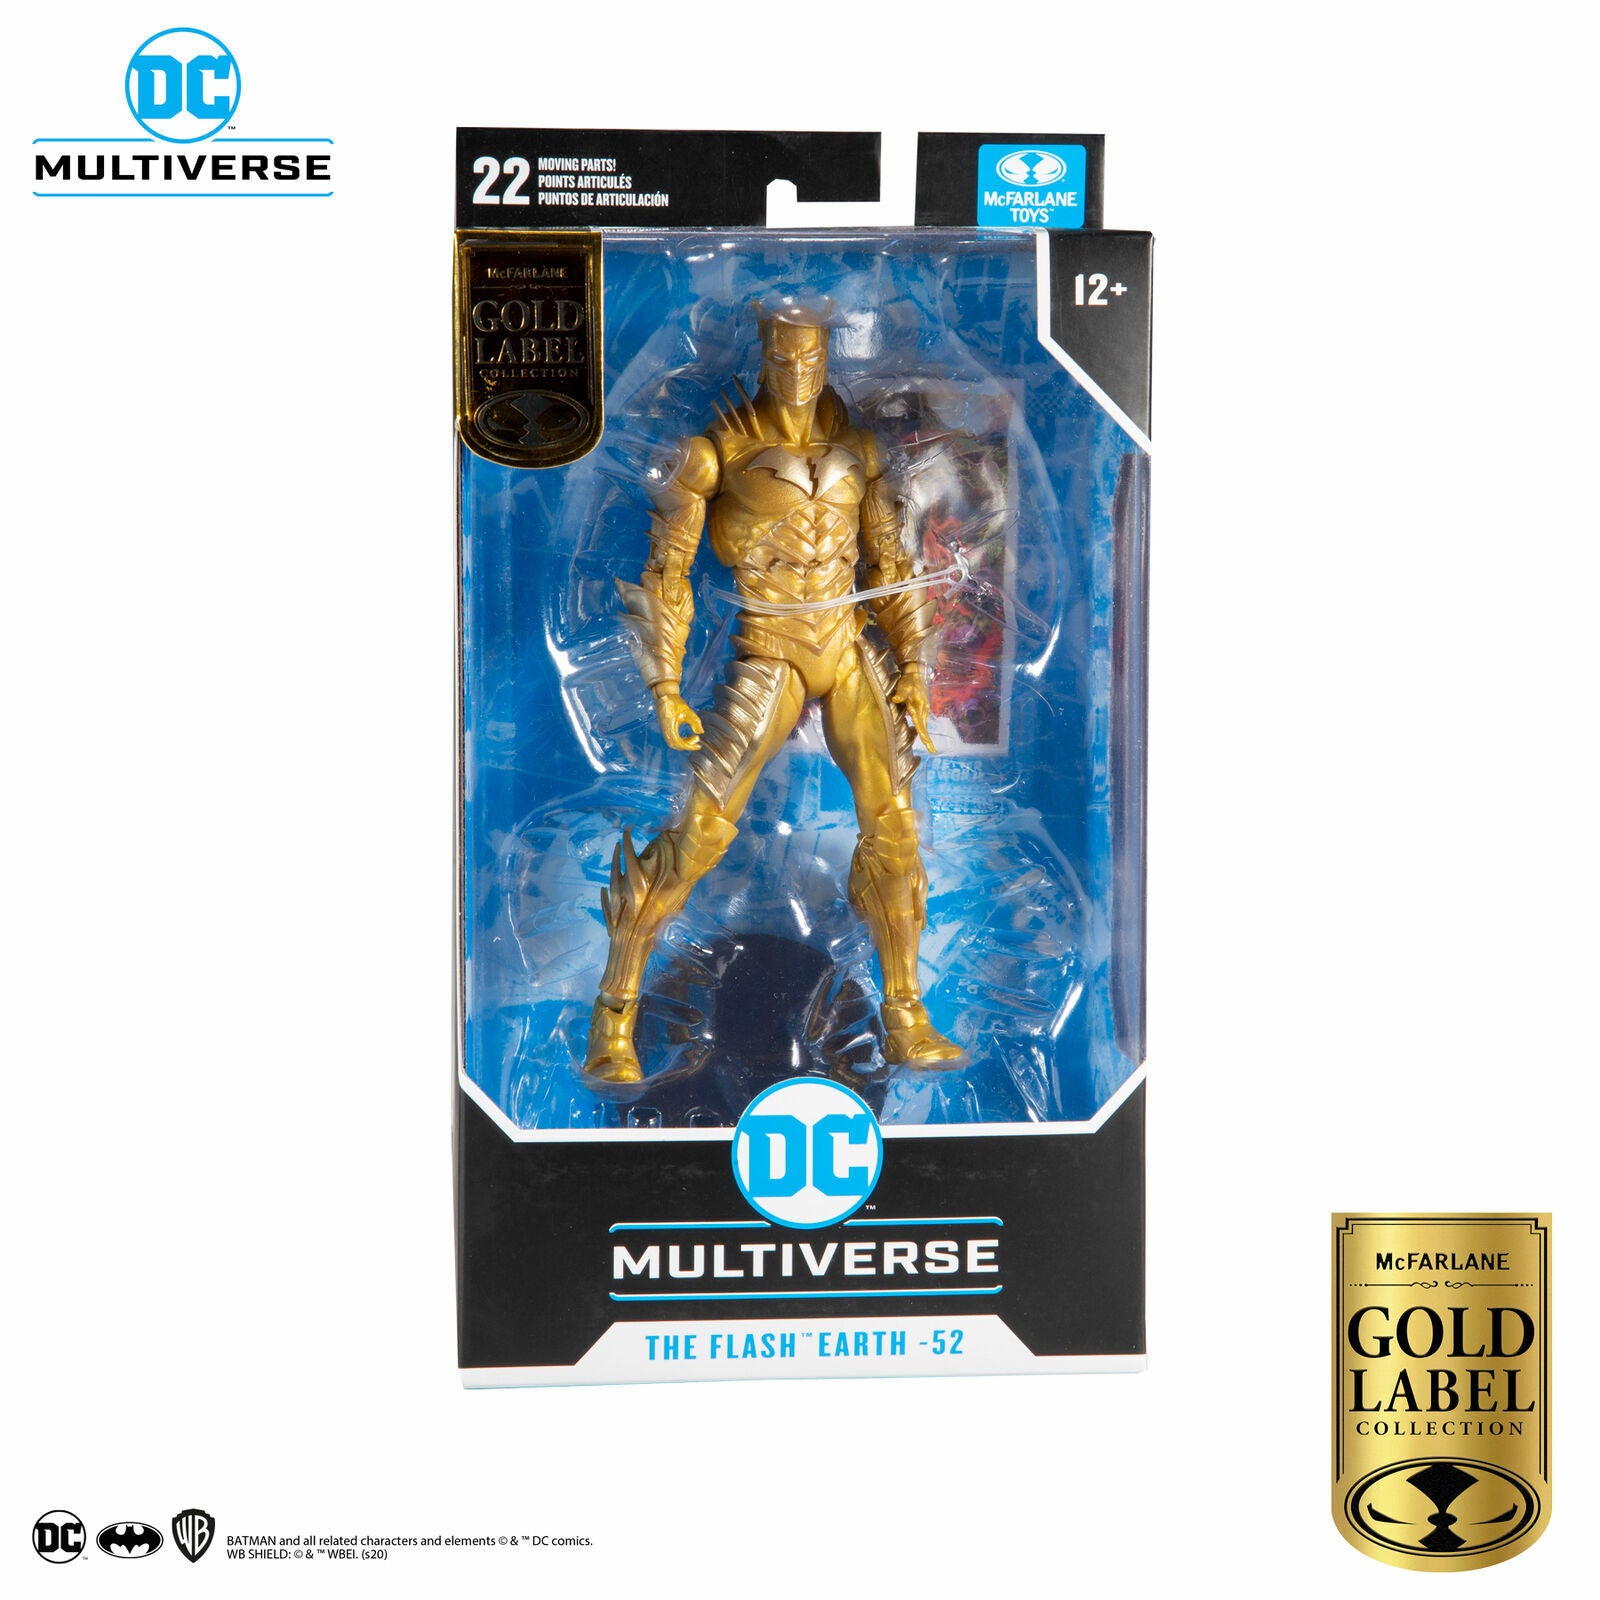 McFarlane Toys DC Multiverse The Flash Earth-52 GOLD LABEL